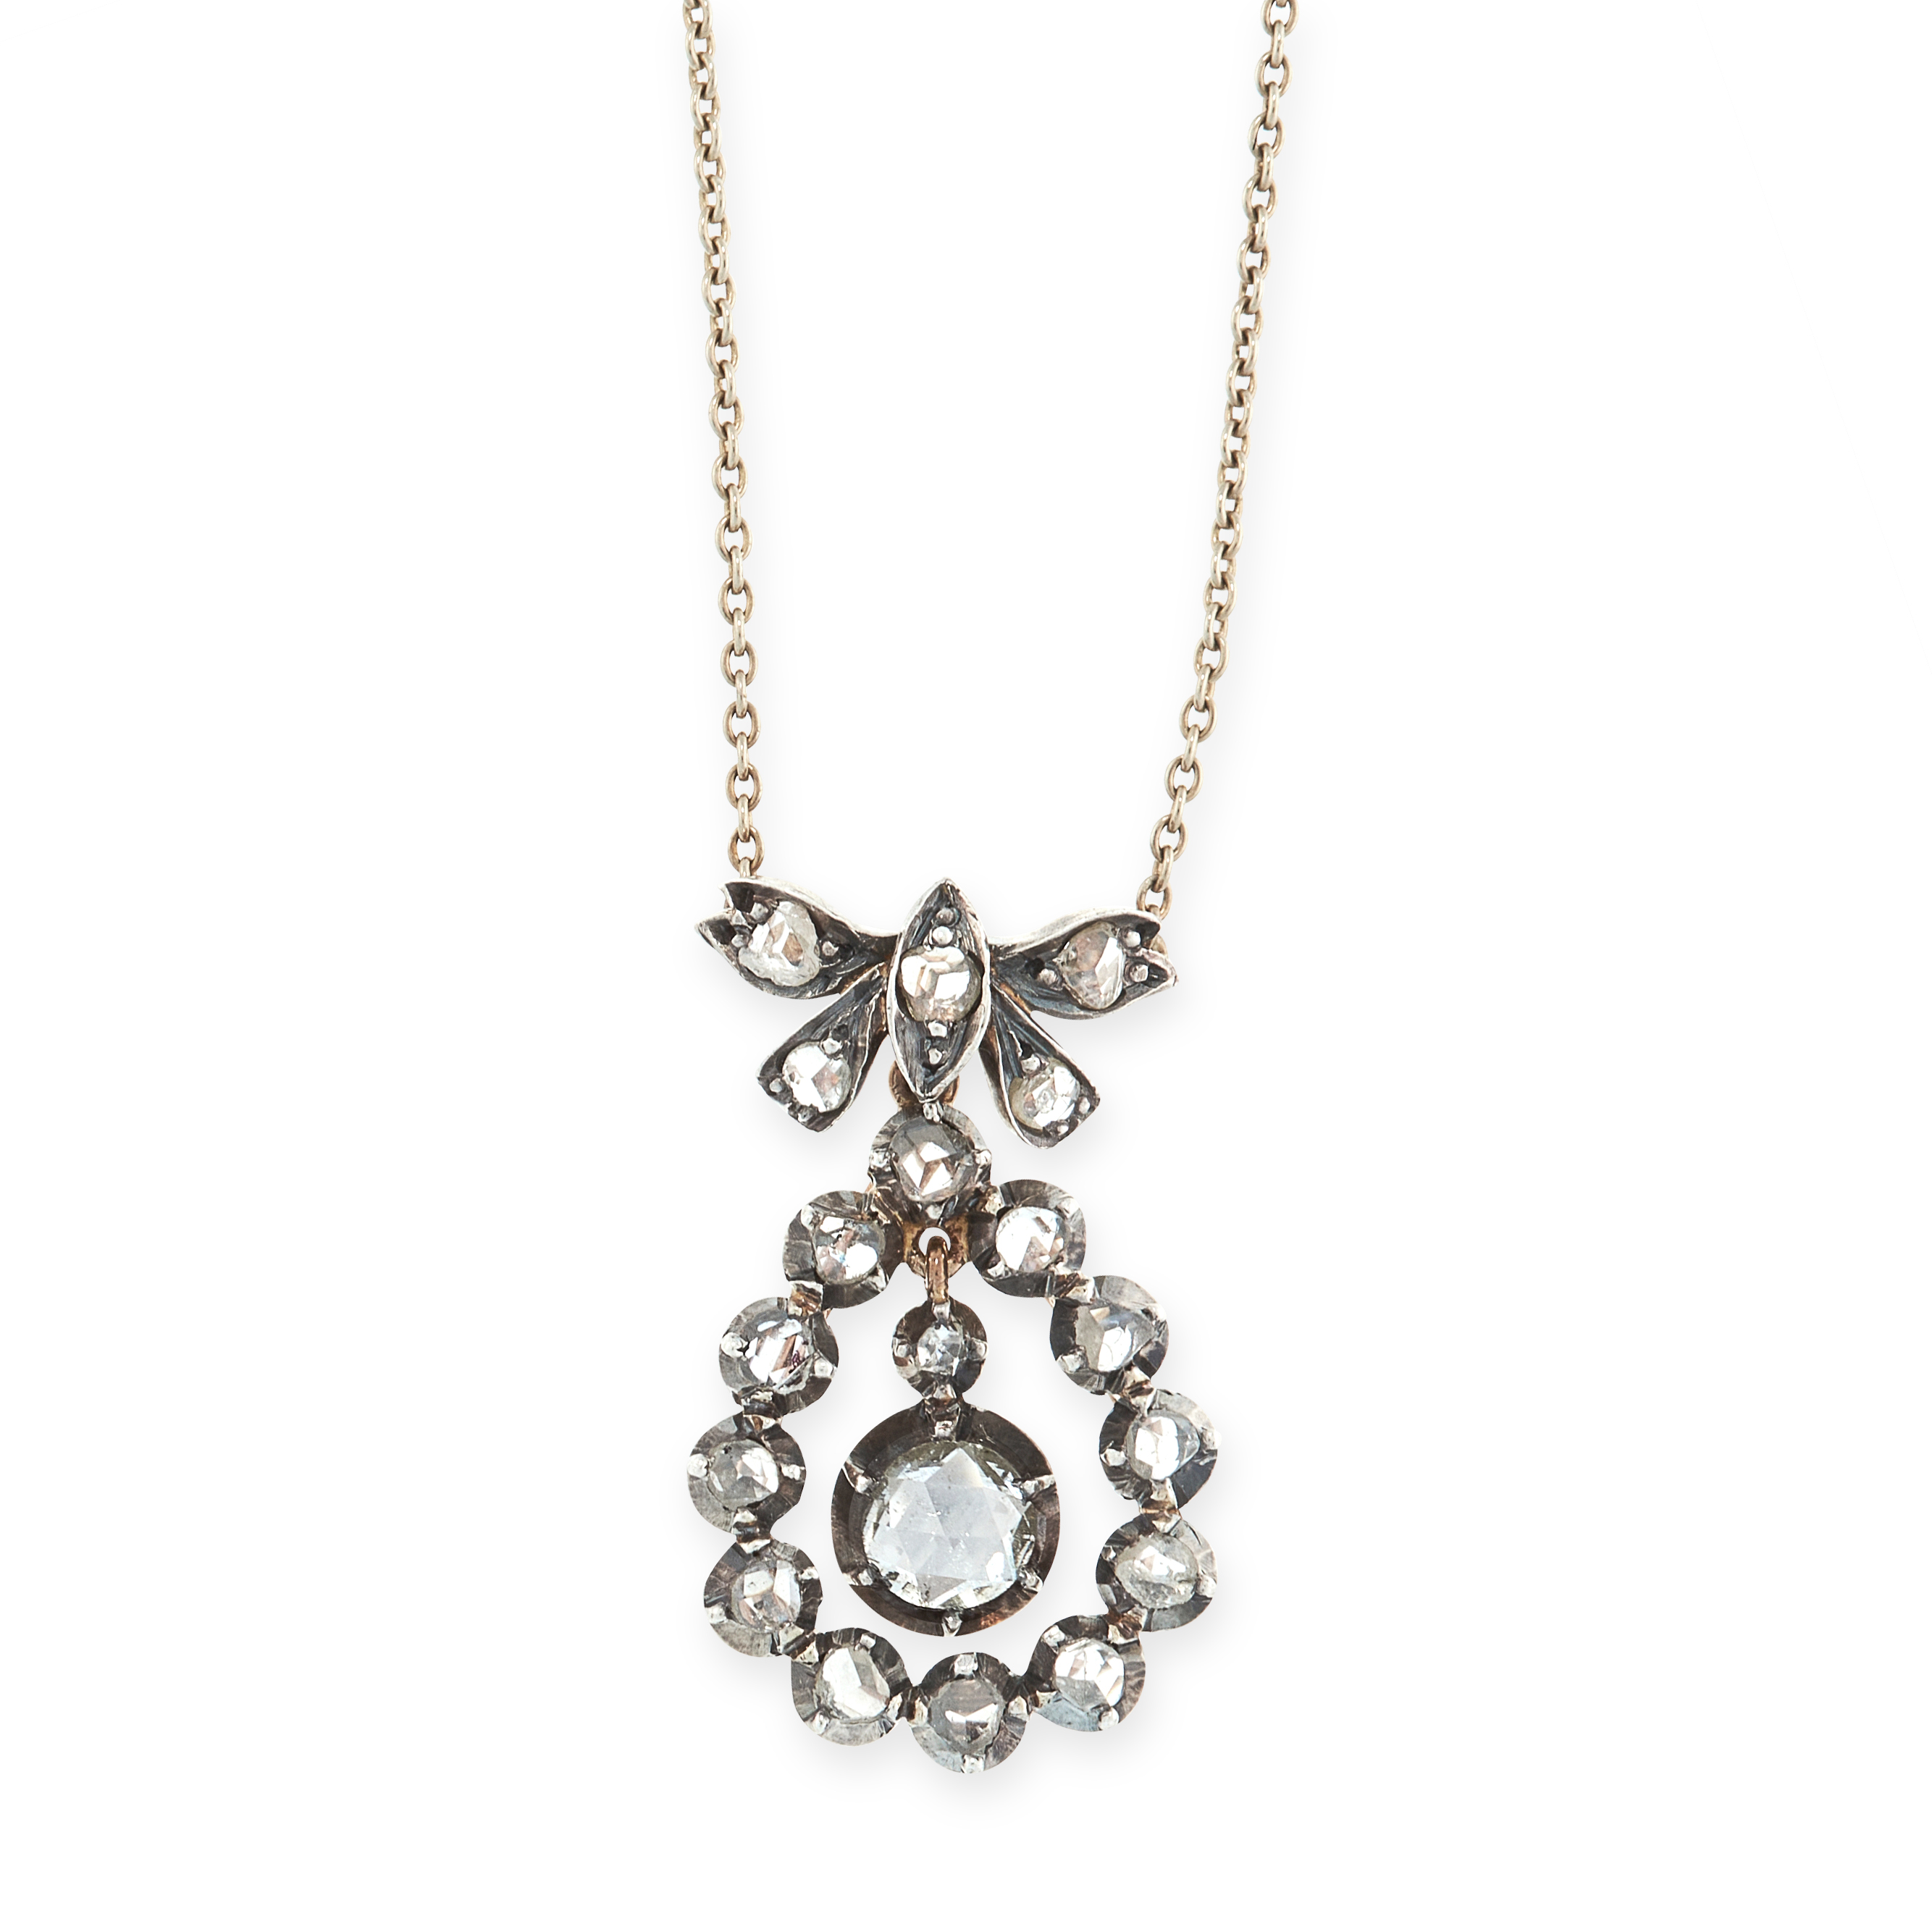 AN ANTIQUE DIAMOND PENDANT NECKLACE, 19TH CENTURY in yellow gold and silver, the pendant set with